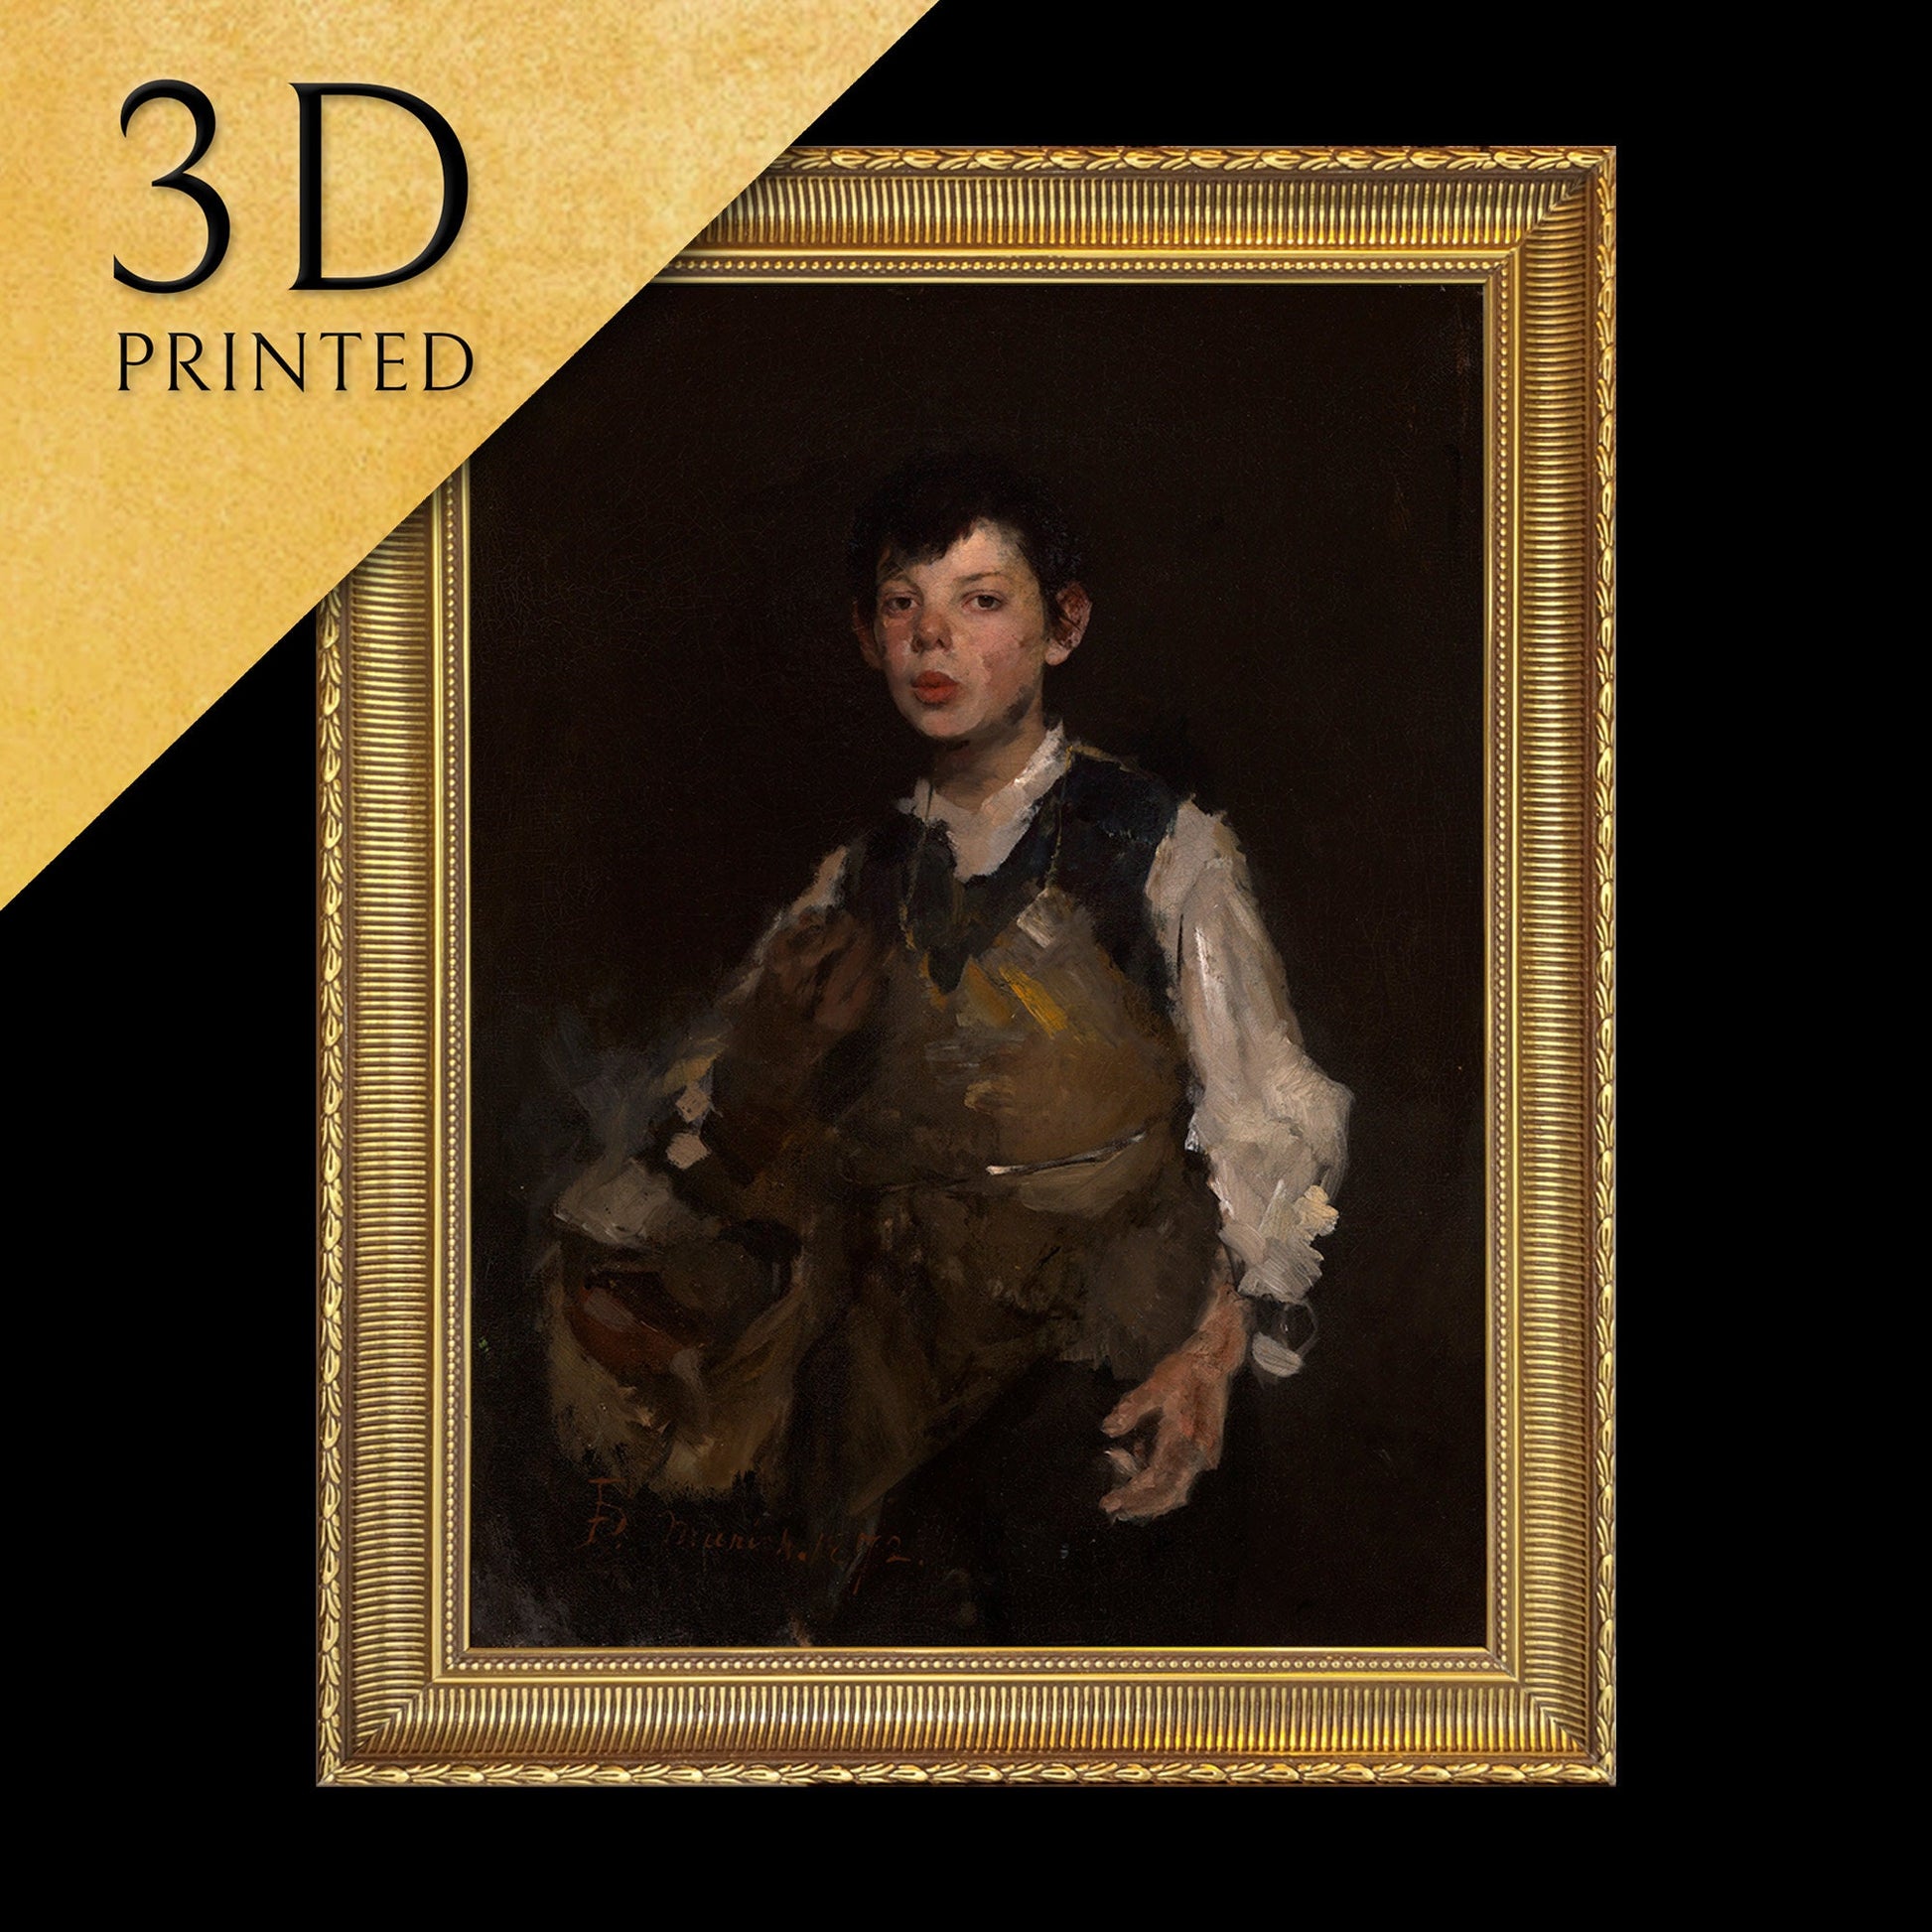 The Whistling Boy by Frank Duveneck, 3d Printed with texture and brush strokes looks like original oil-painting, code:294